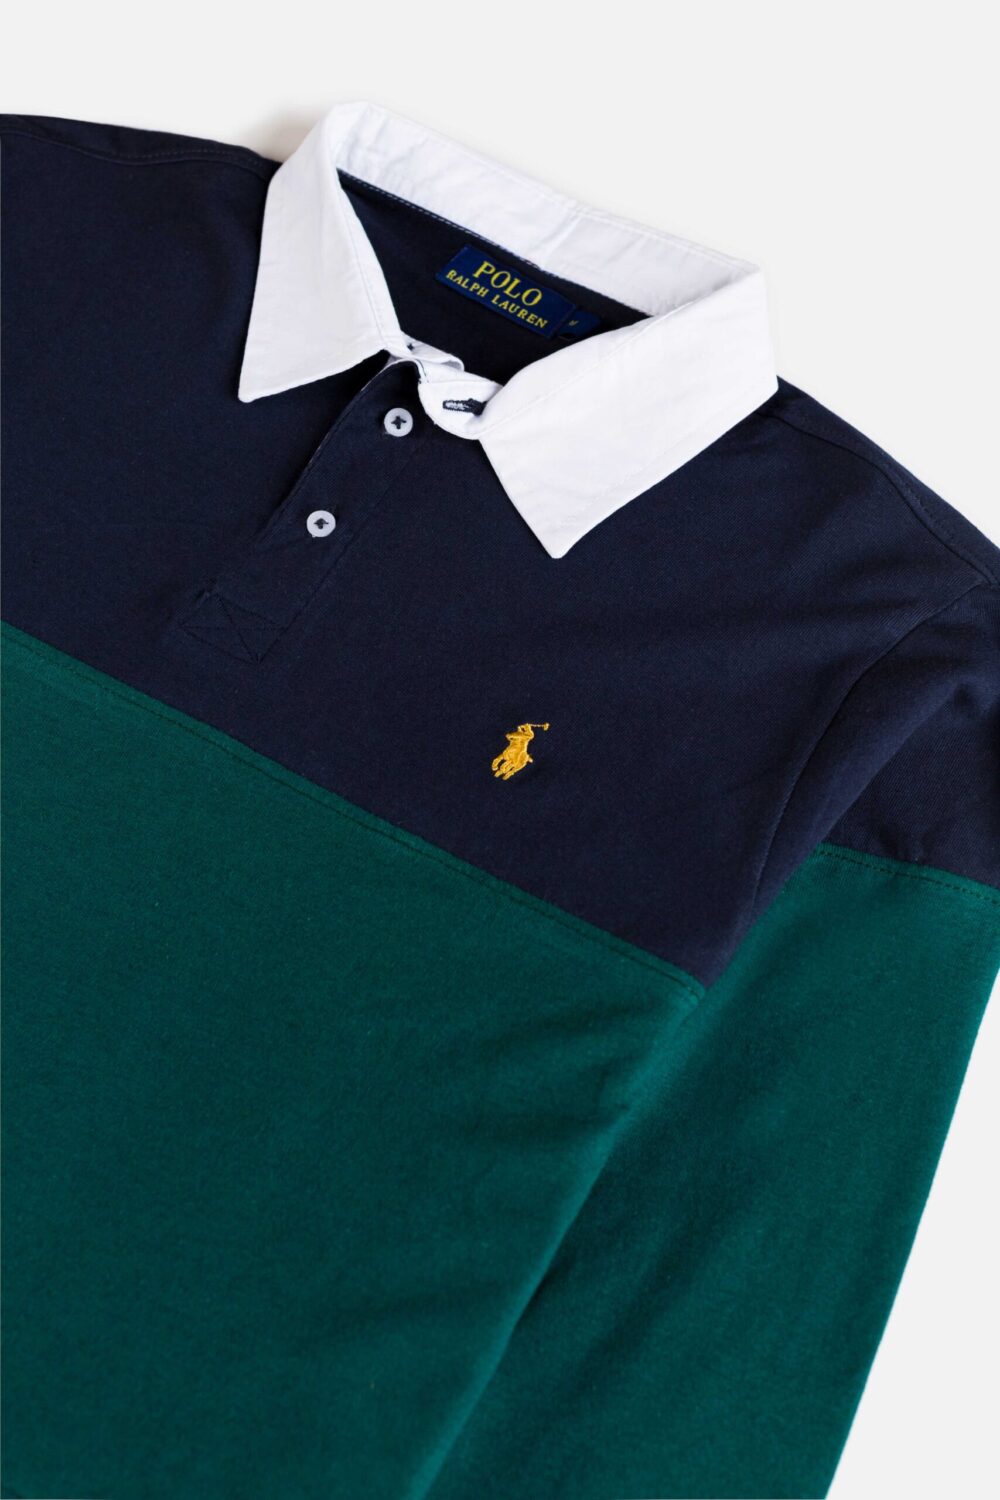 RL Premium Cotton Full Rugby Polo – Tri-Color Panelled